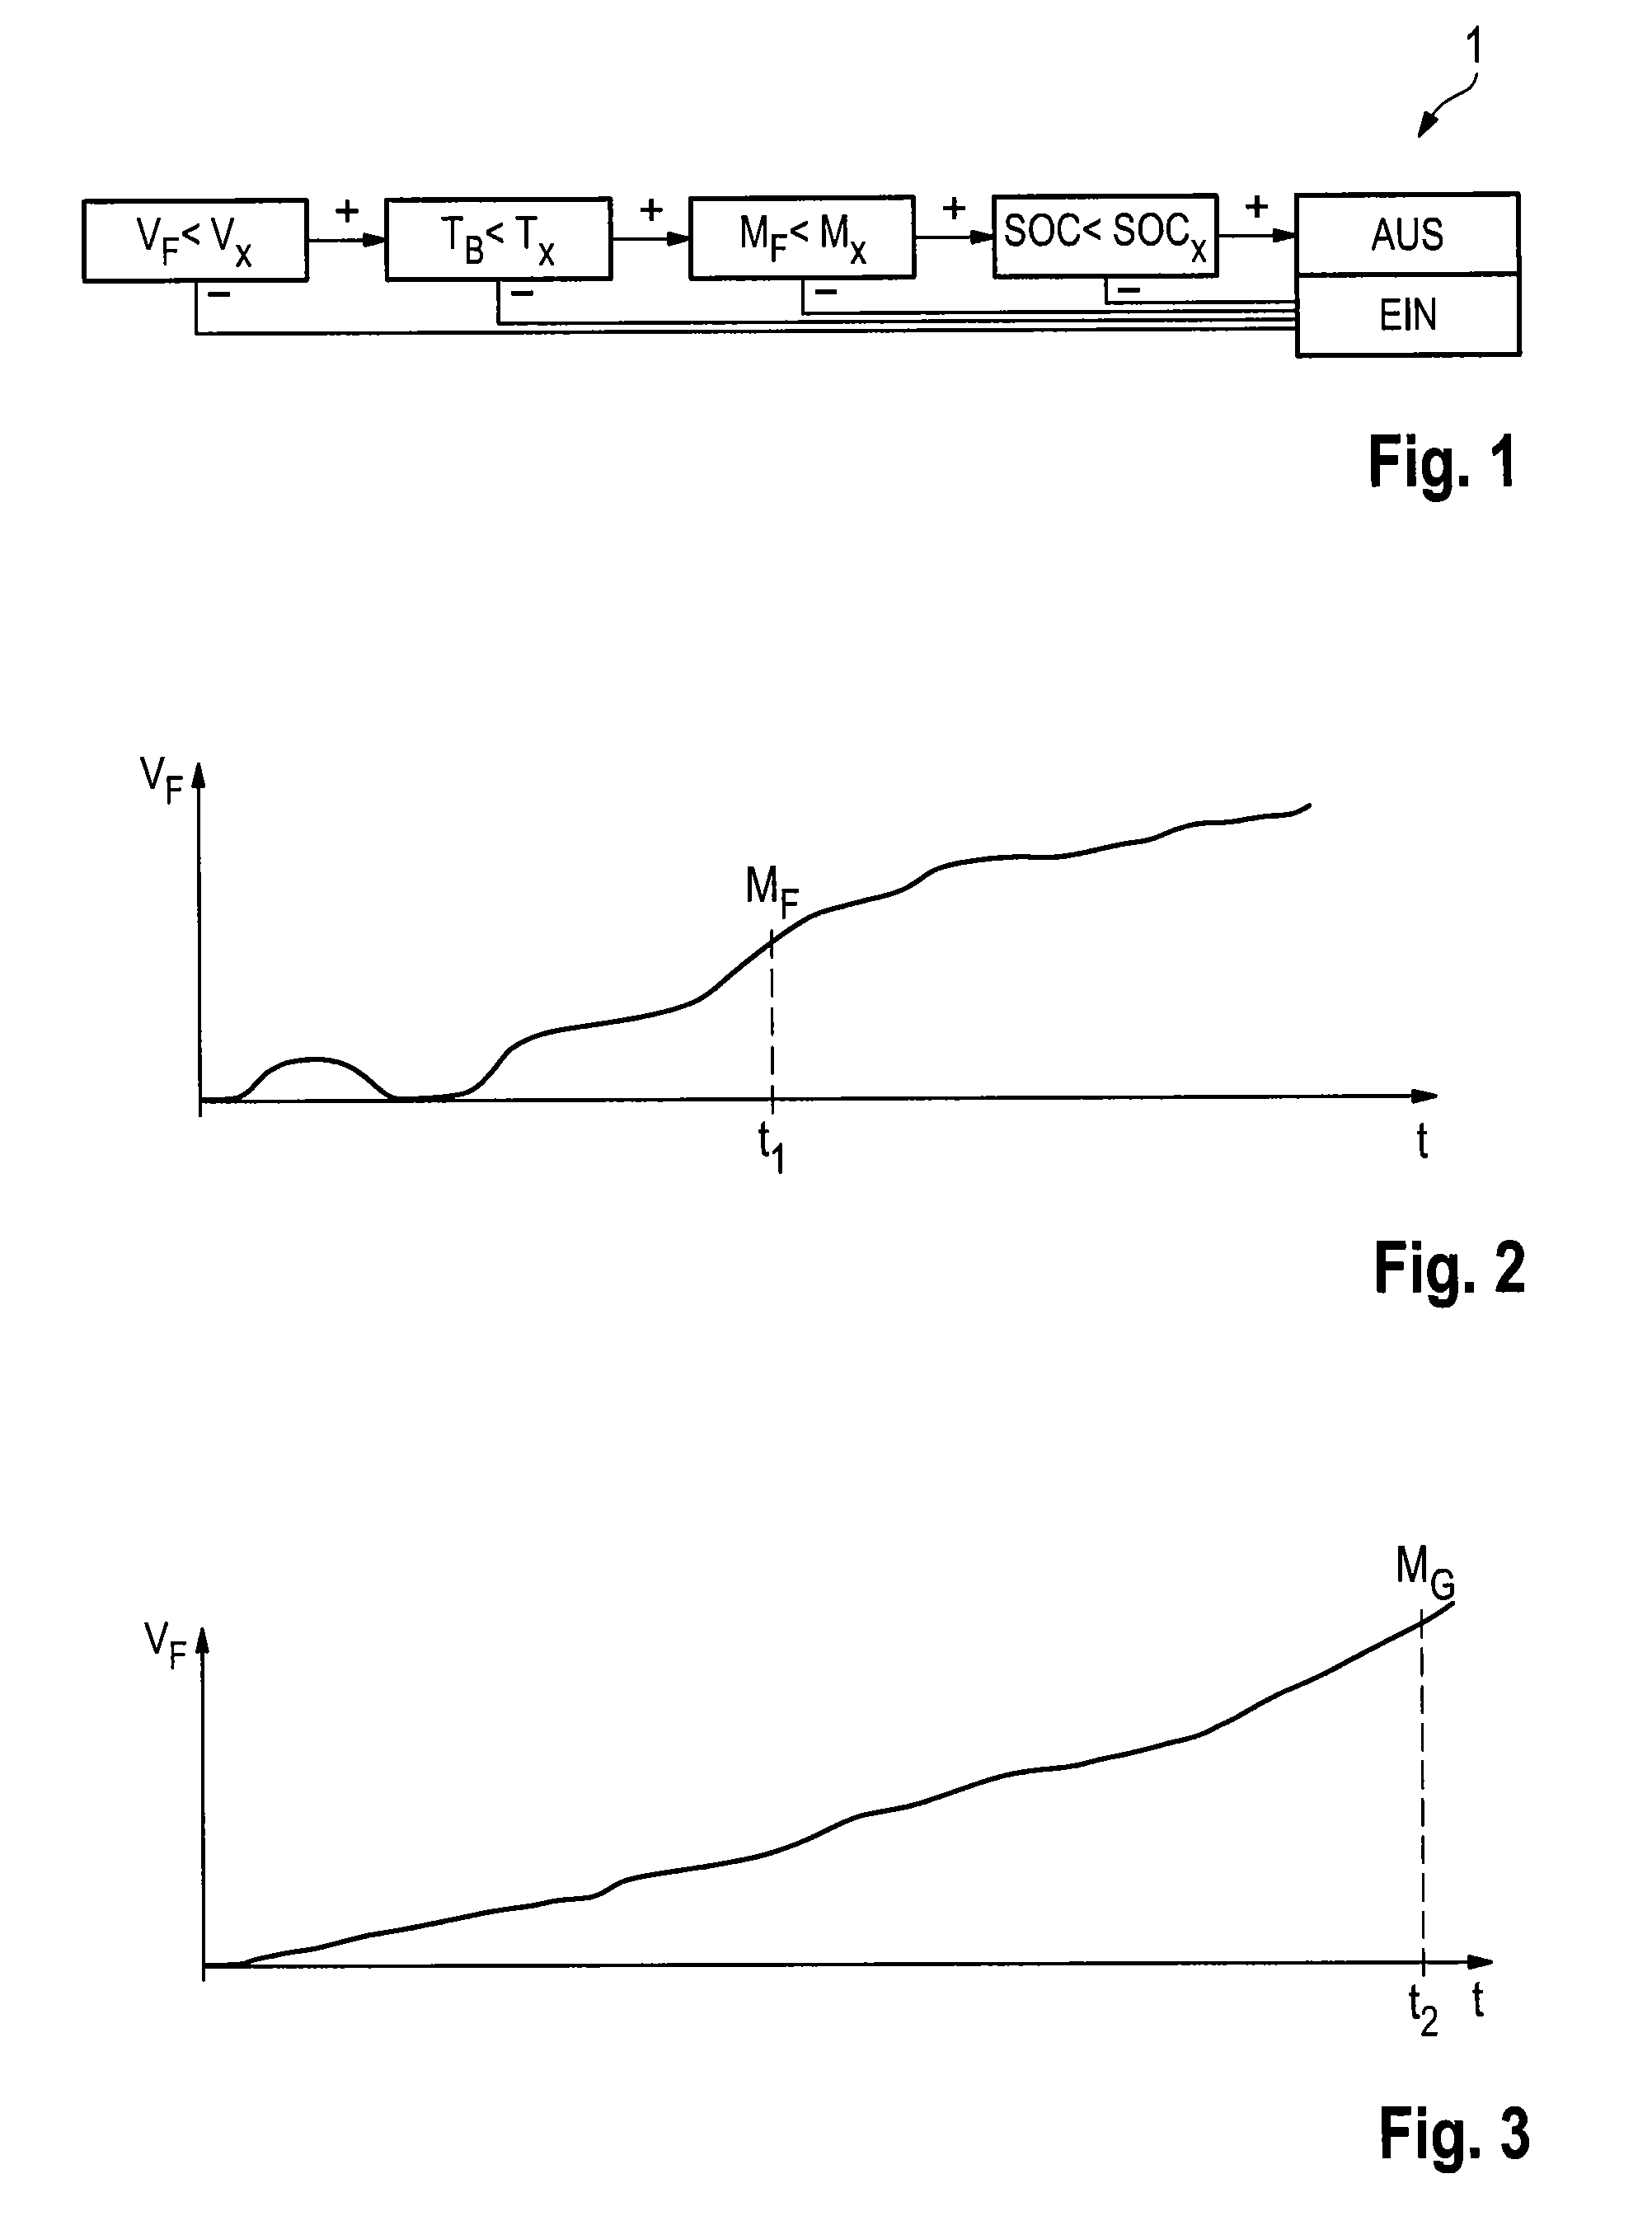 Operating method for a hybrid vehicle